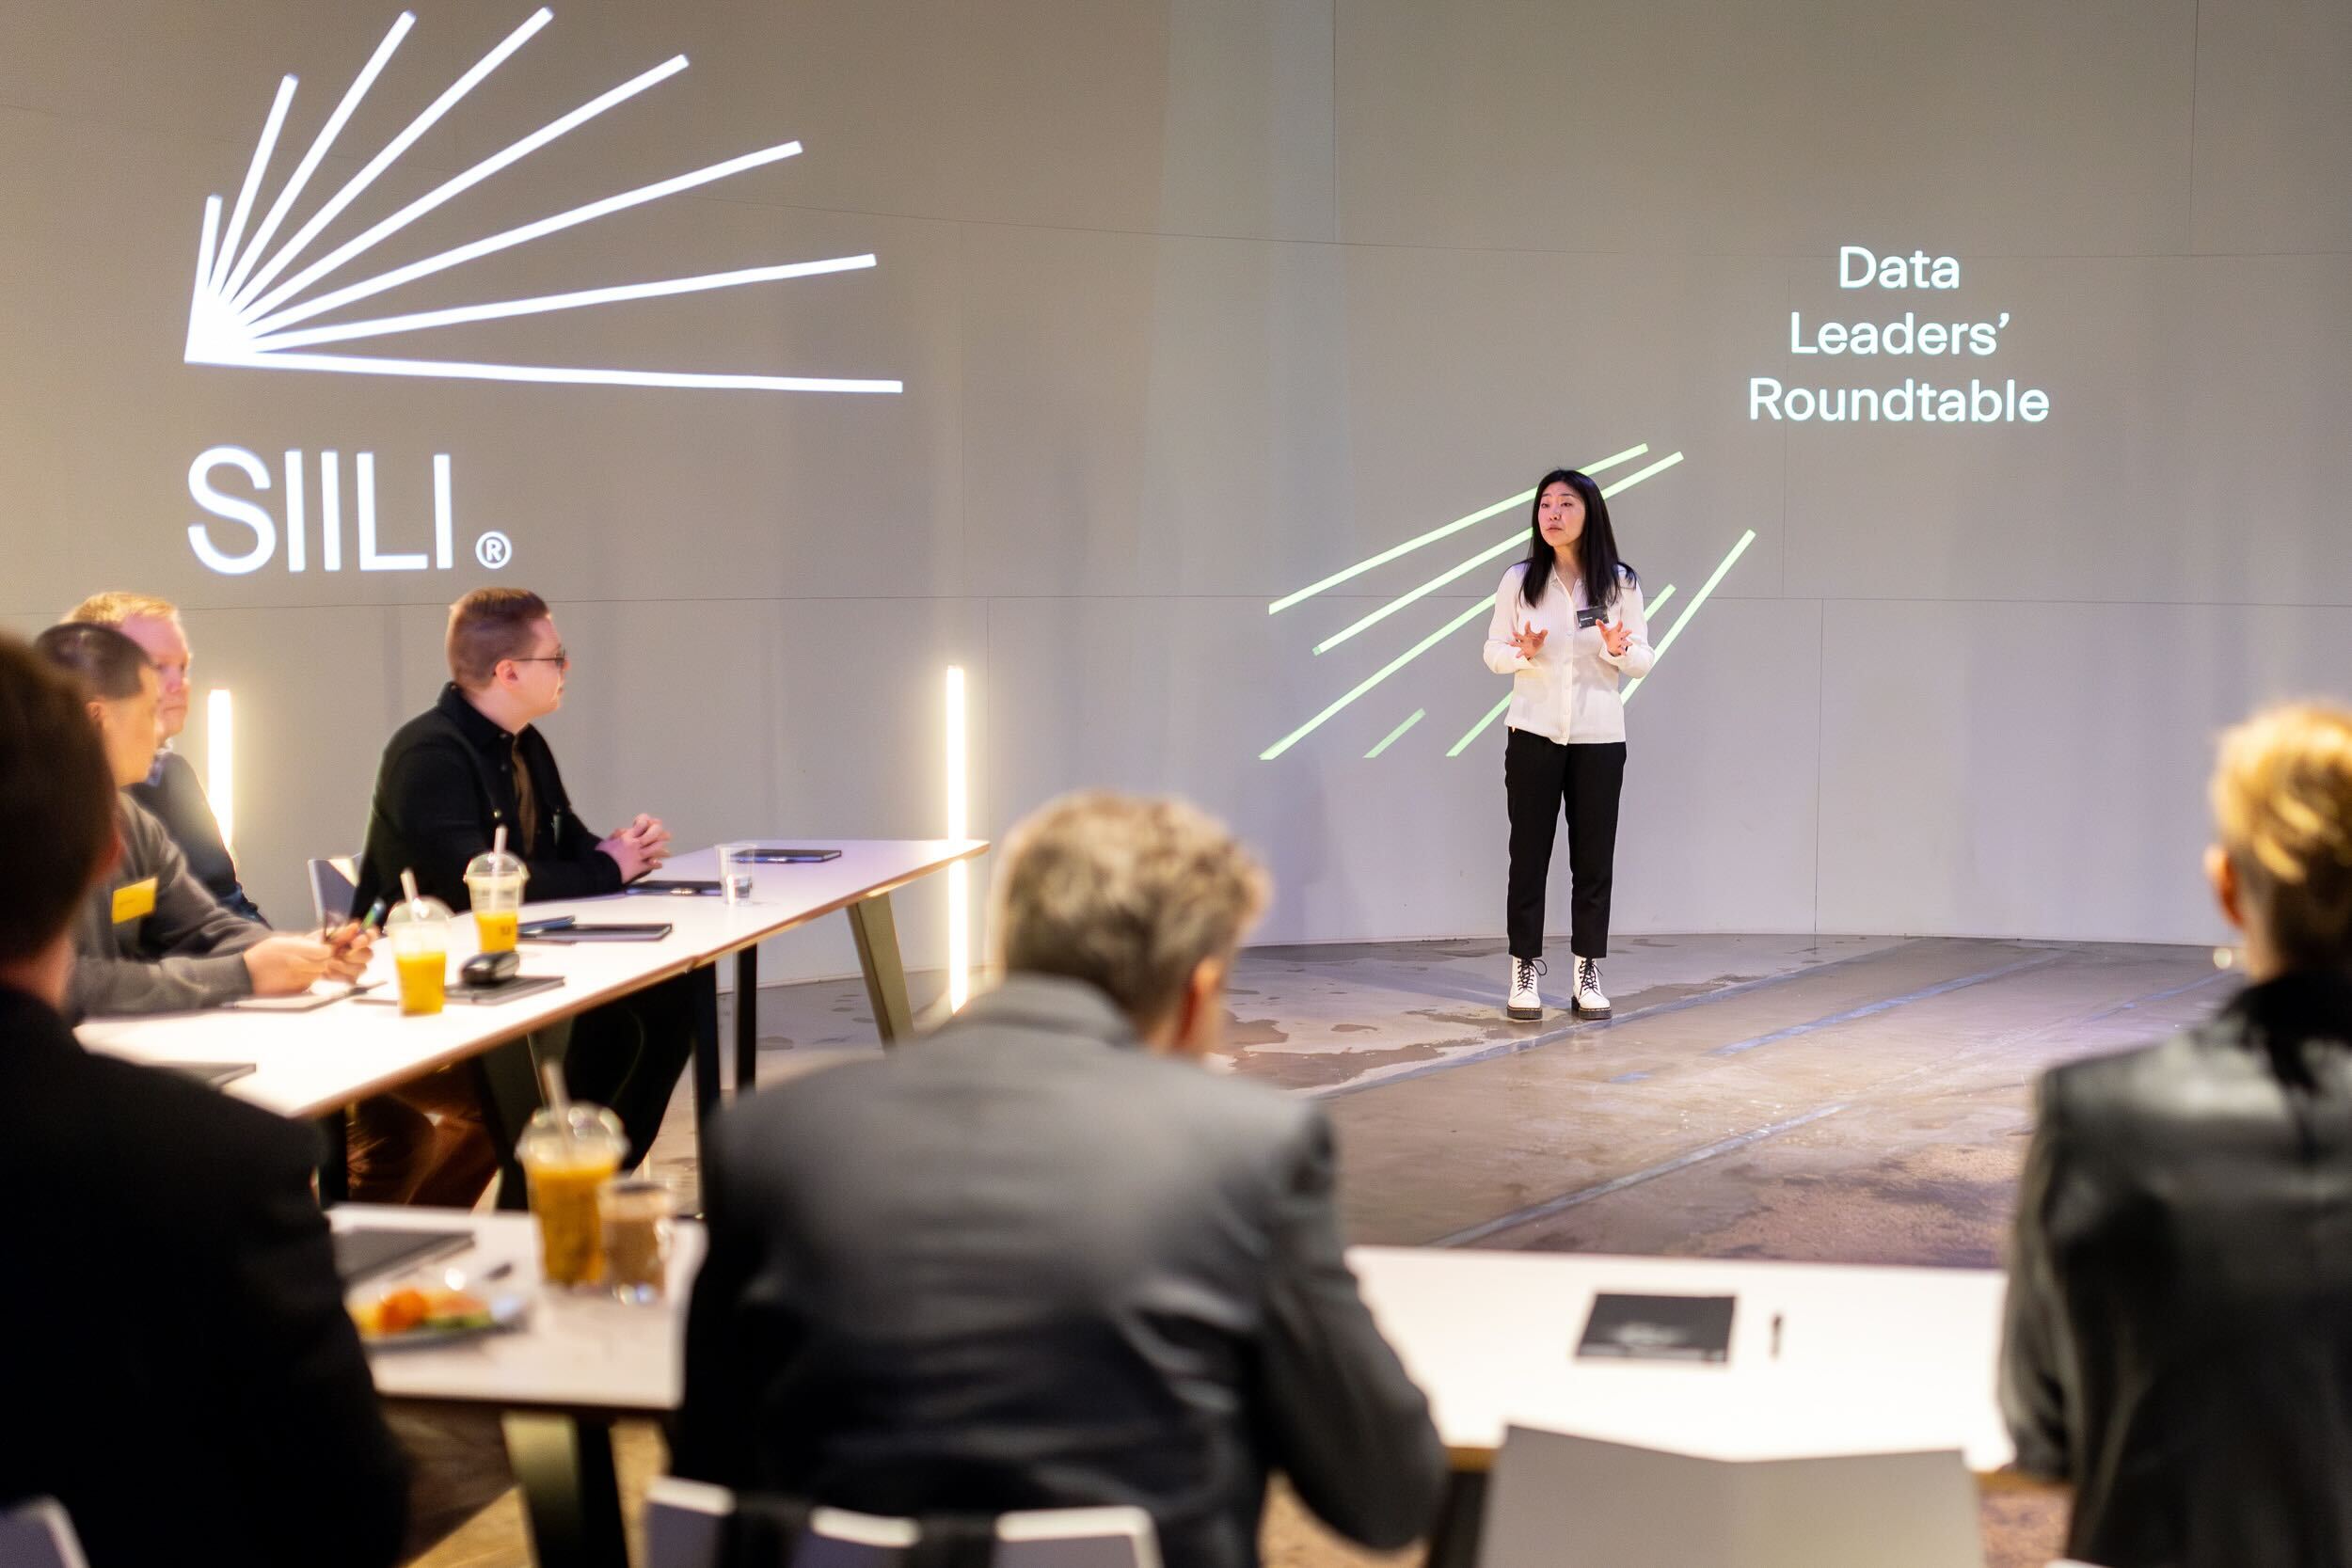 Data Leaders' Roundtable: Unpacking the key insights